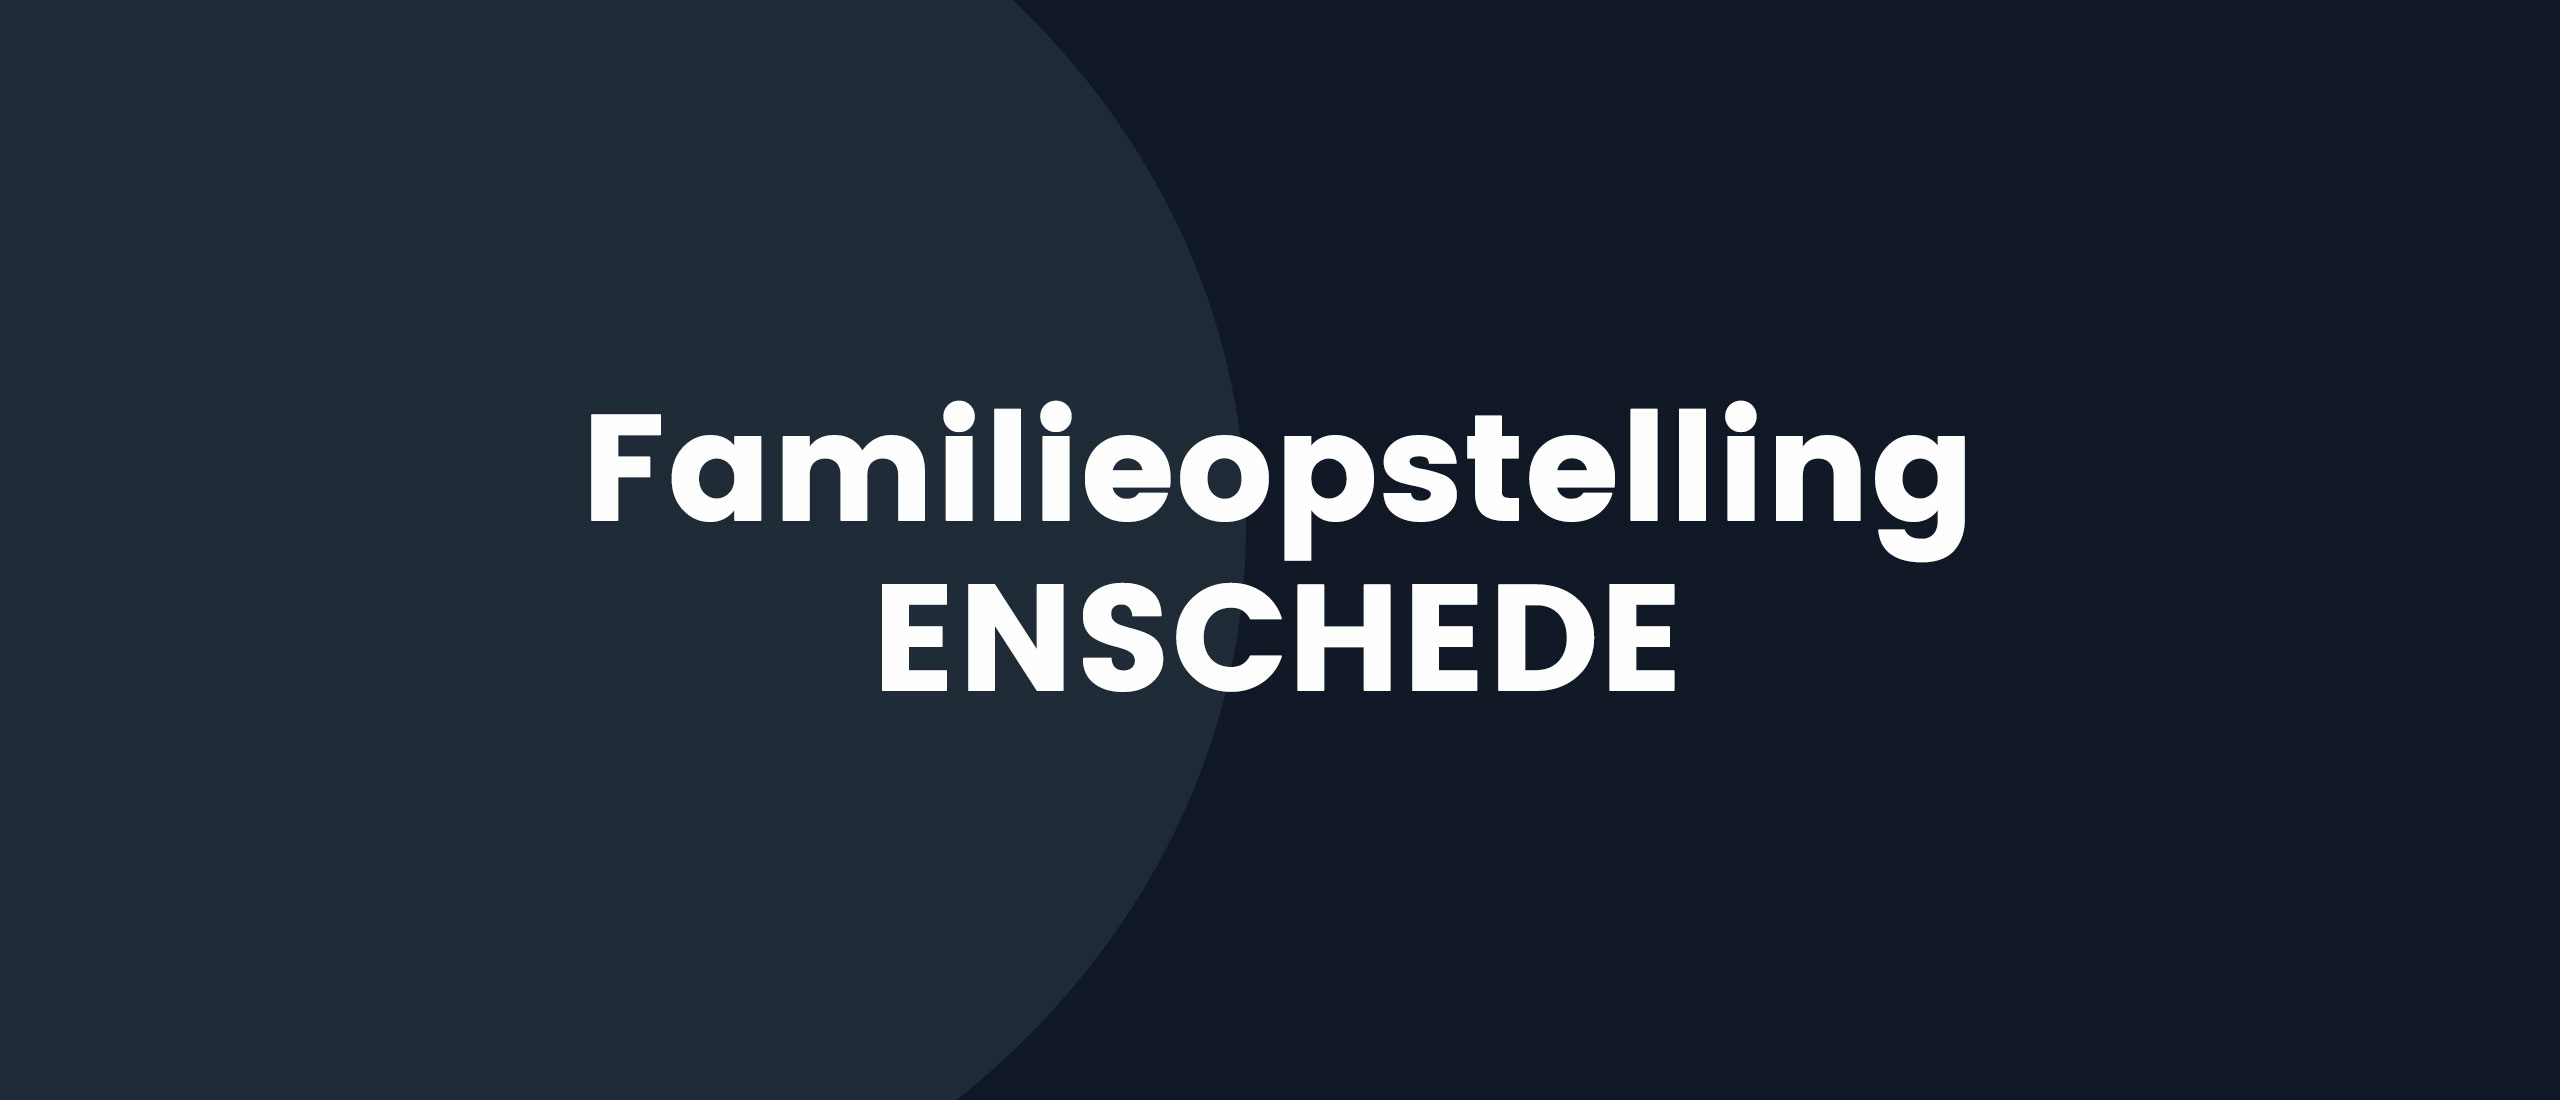 Familieopstelling Enschede